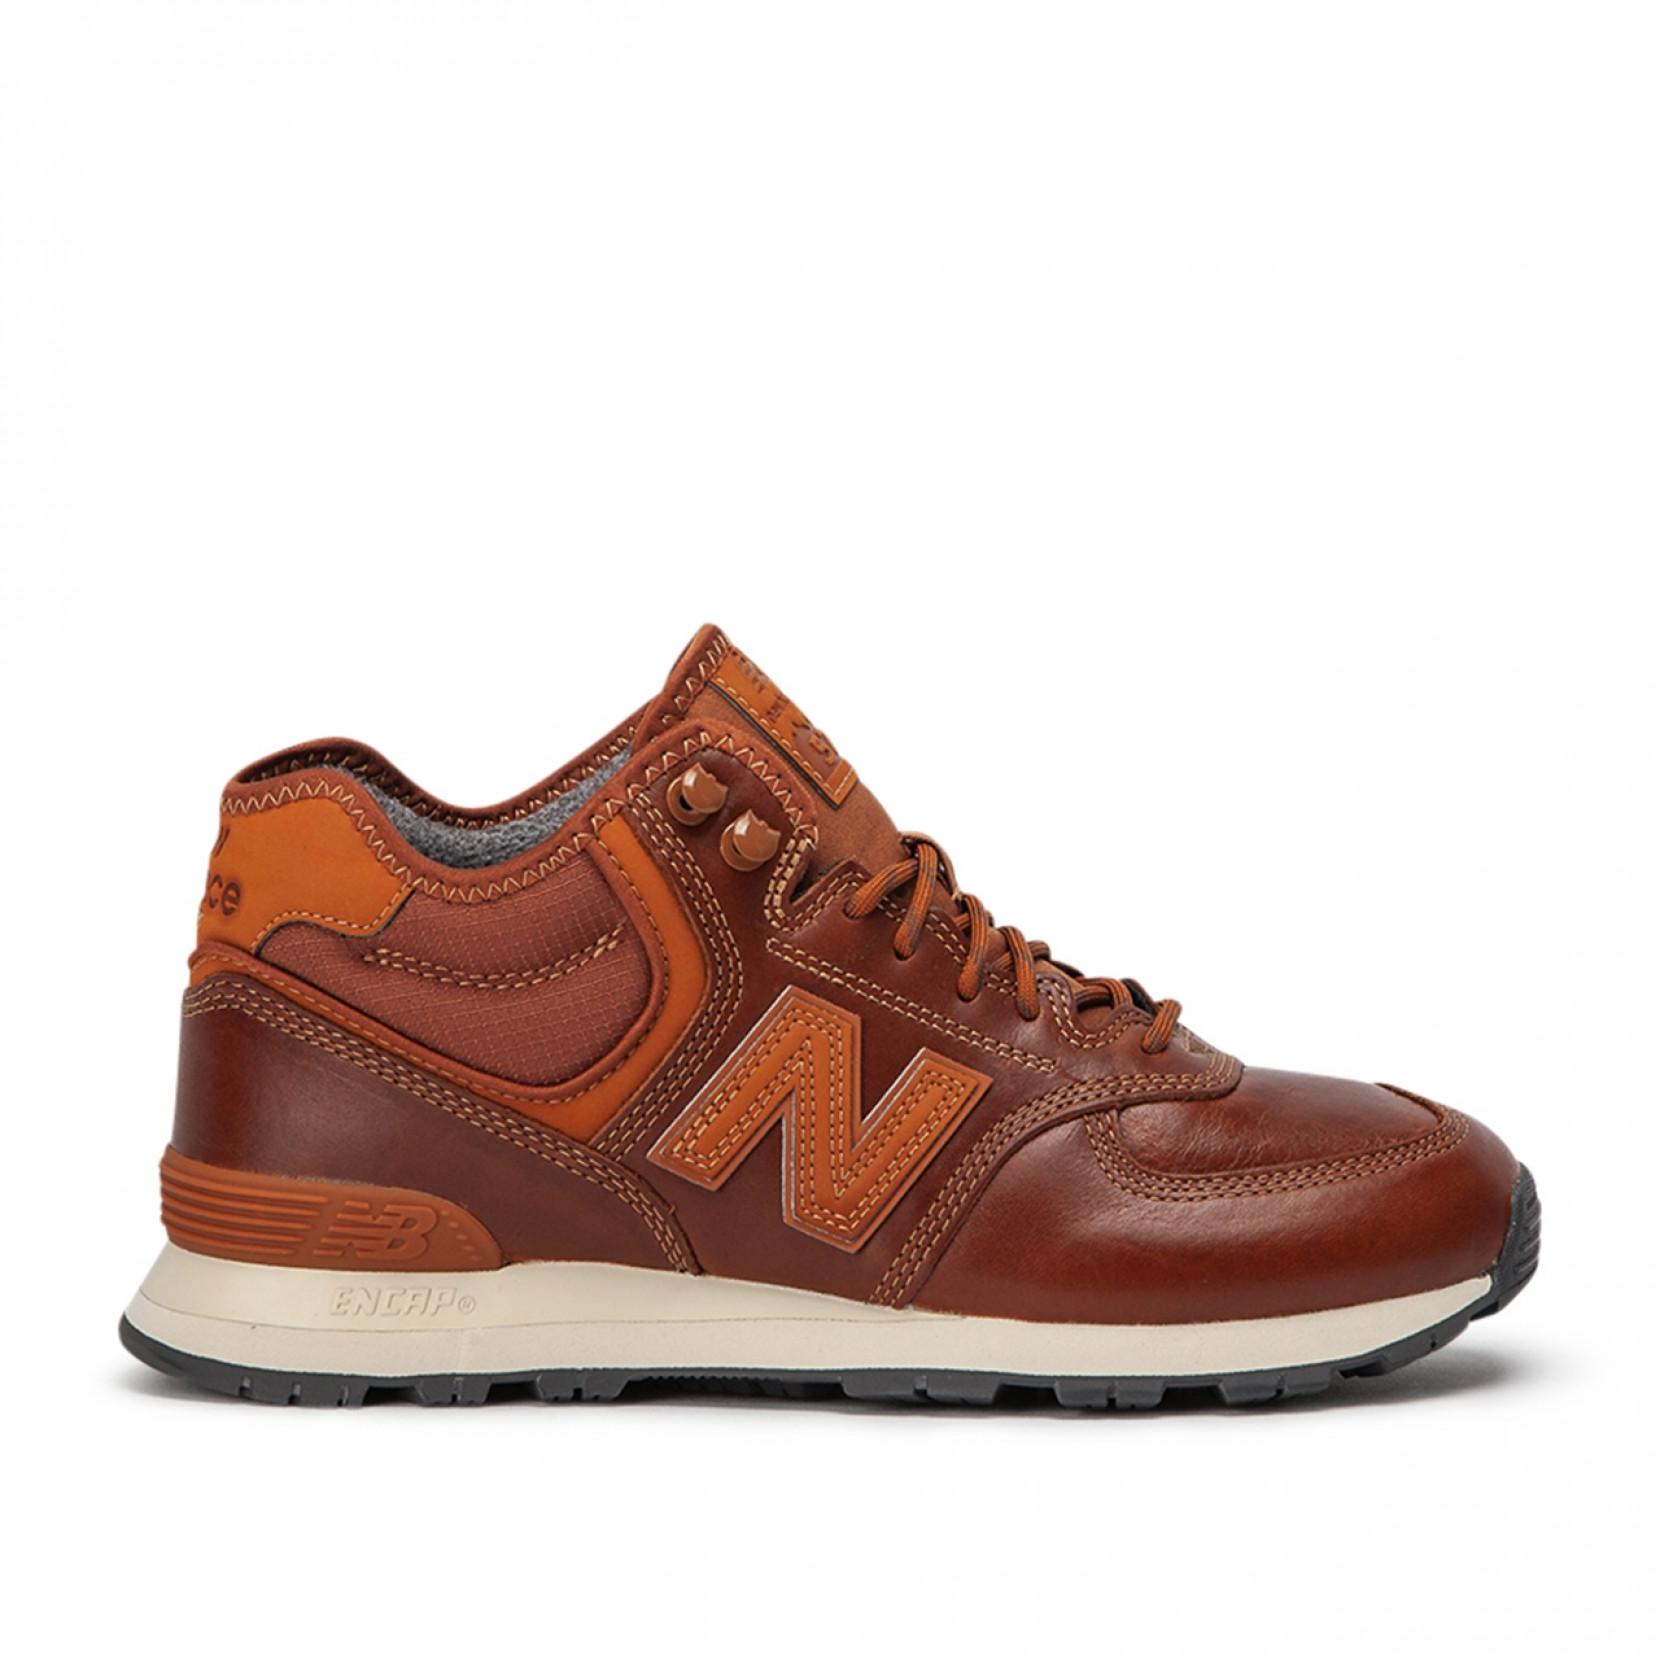 New Balance Leather Mh574 Oad in Brown for Men - Lyst